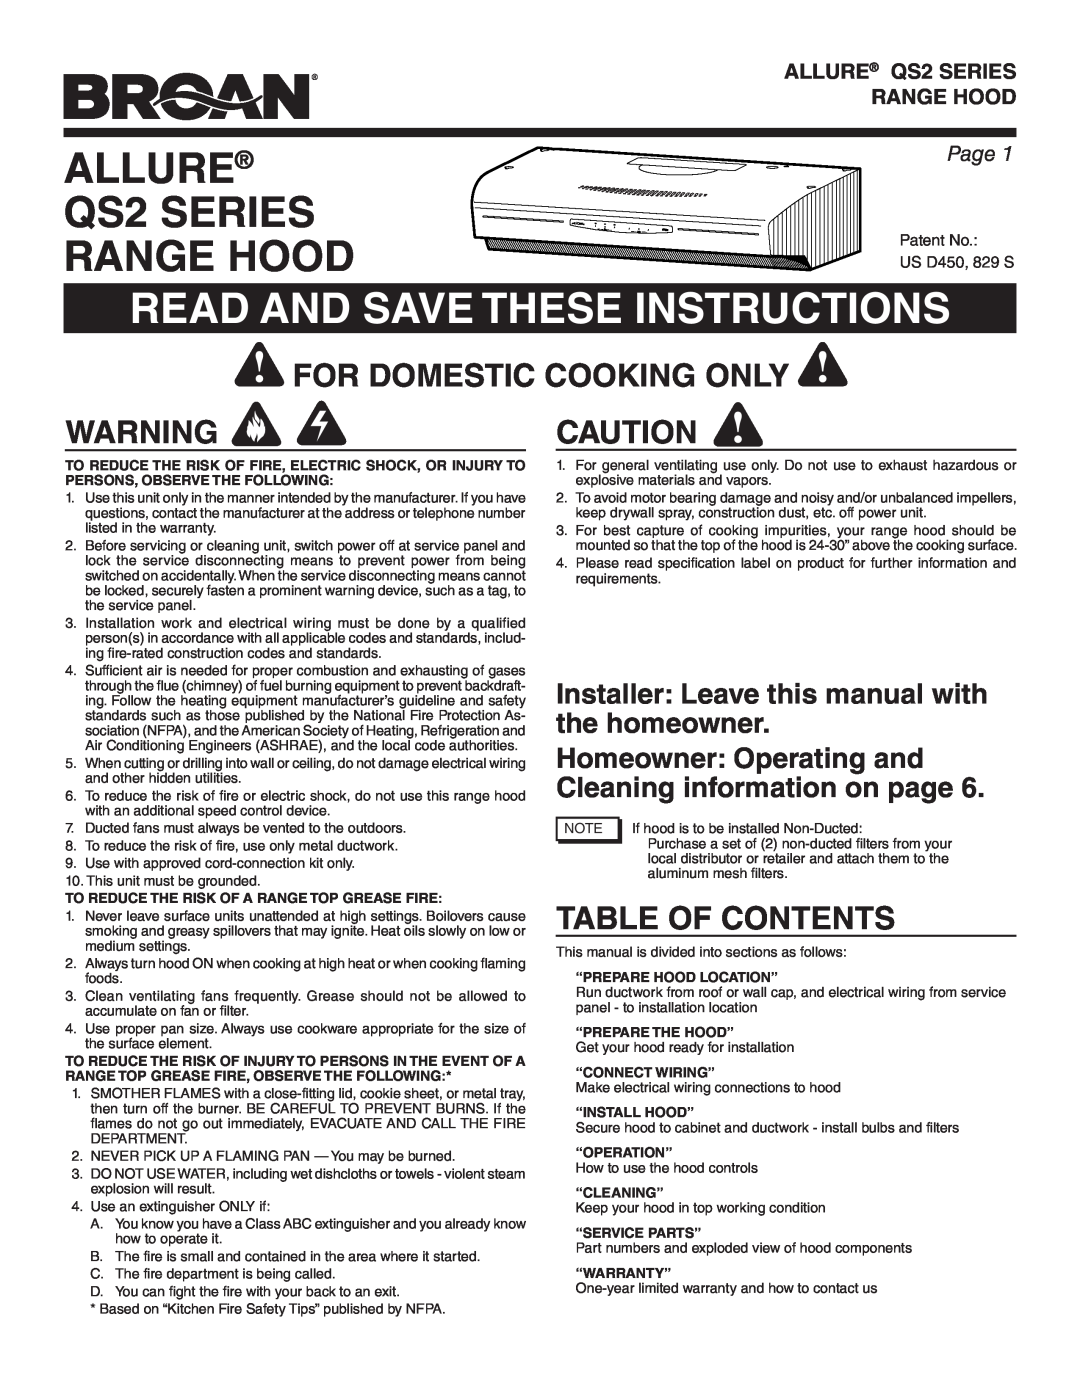 Broan QS242SS warranty ALLURE QS2 SERIES RANGE HOOD, Read And Save These Instructions, For Domestic Cooking Only, Page 